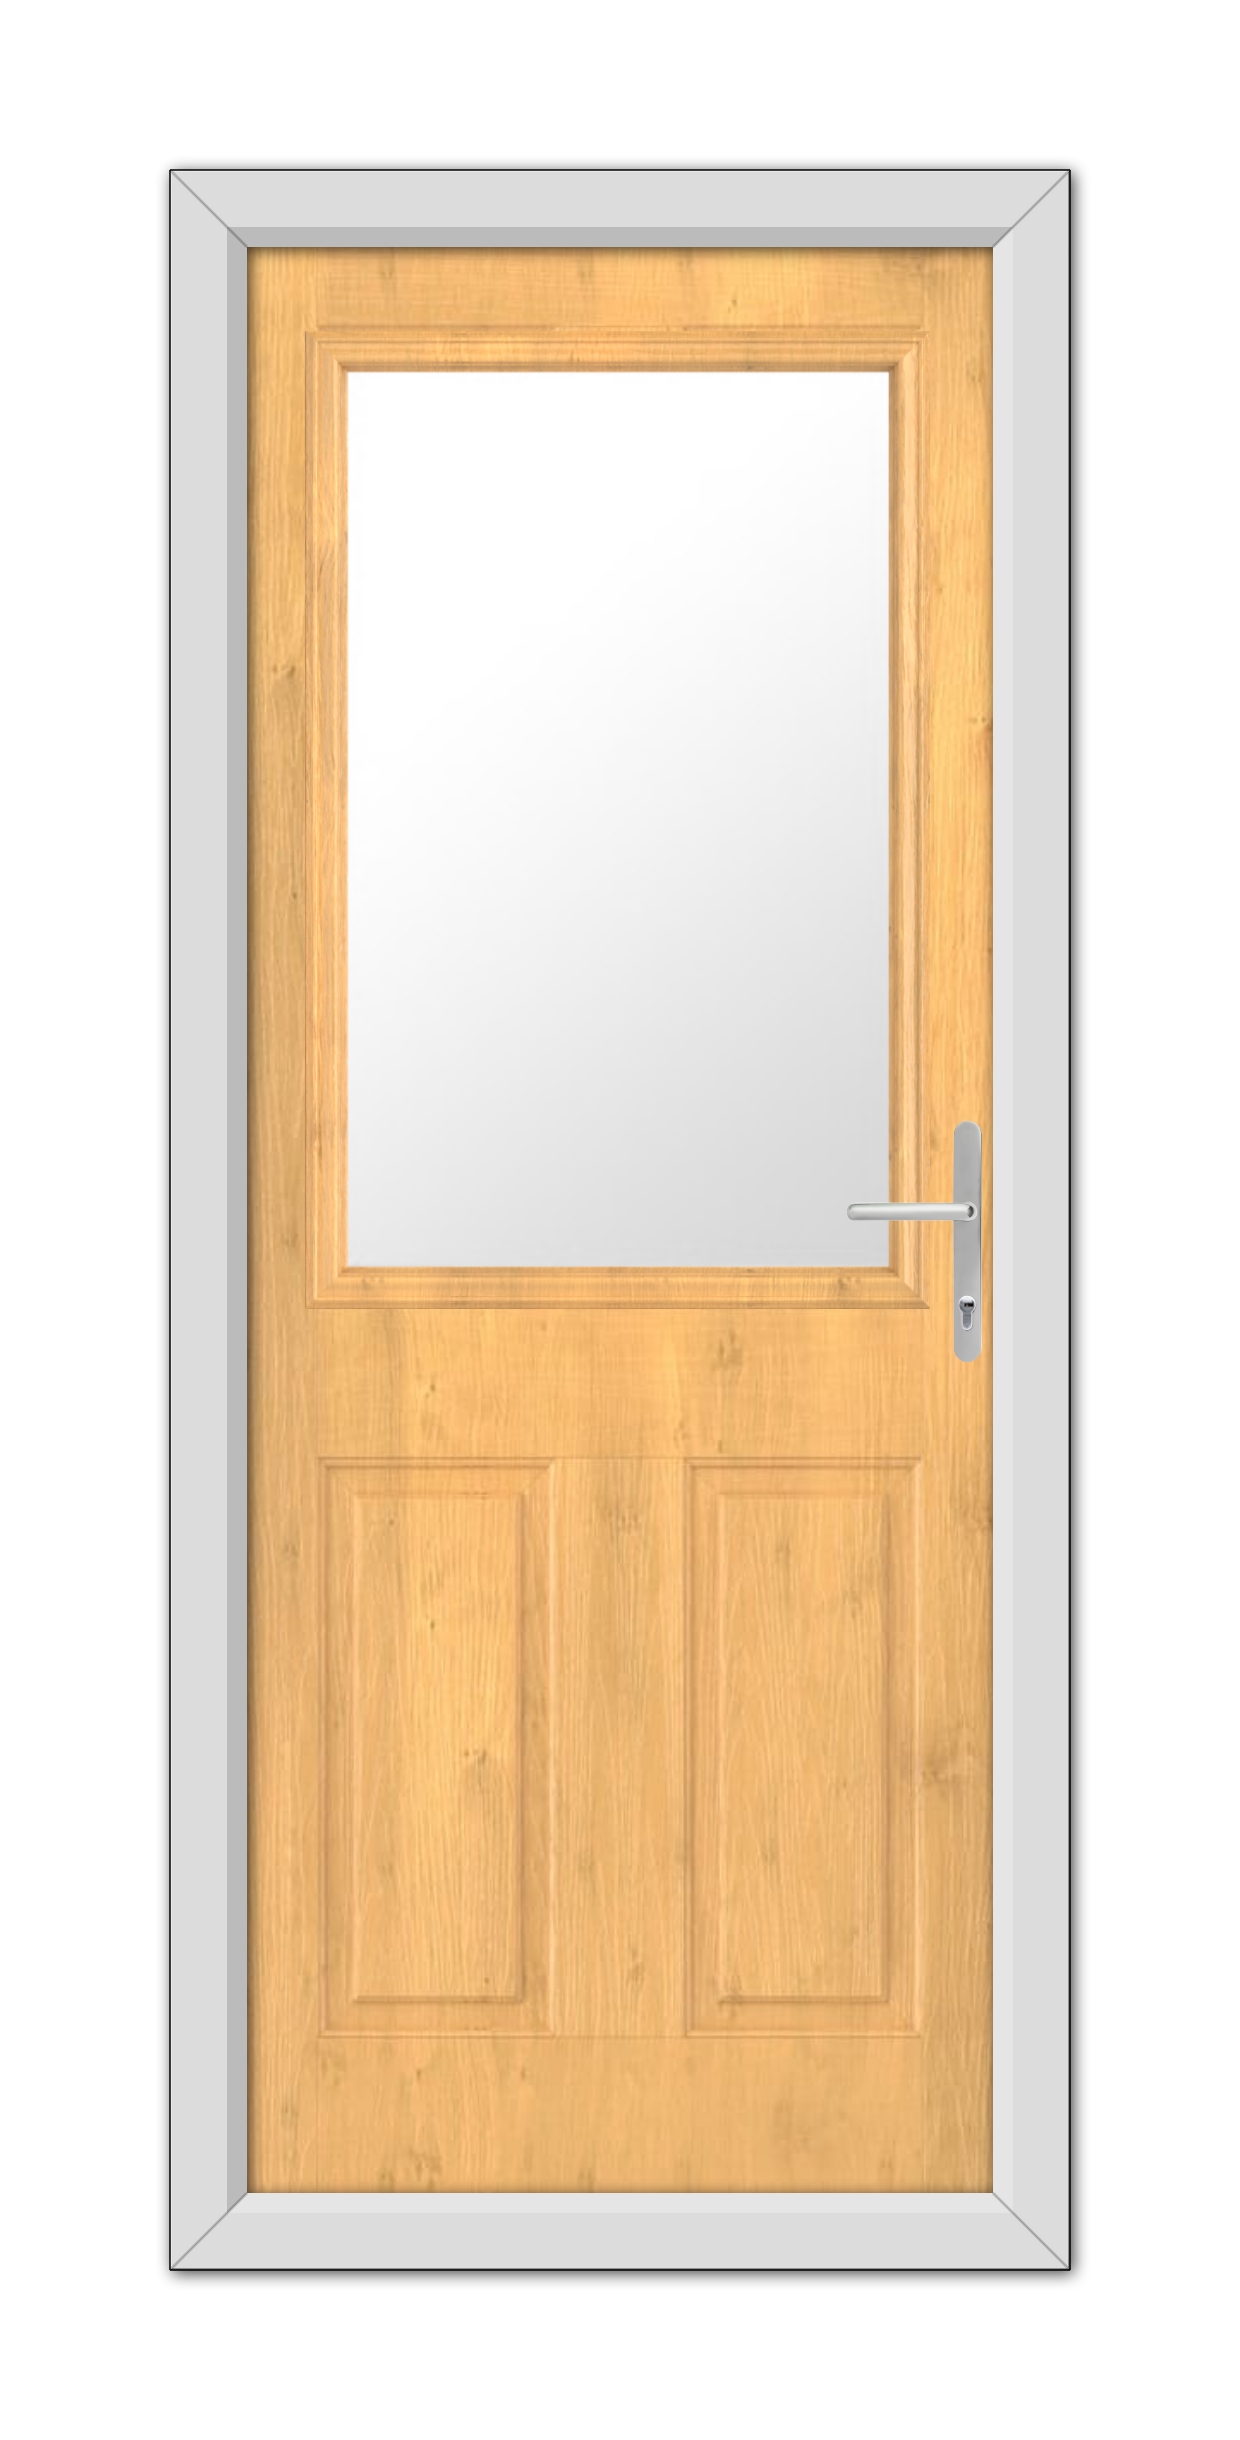 Irish Oak Buxton Composite Door 48mm Timber Core with a glass panel at the top, featuring a metal handle on the right side, framed by a gray casing.